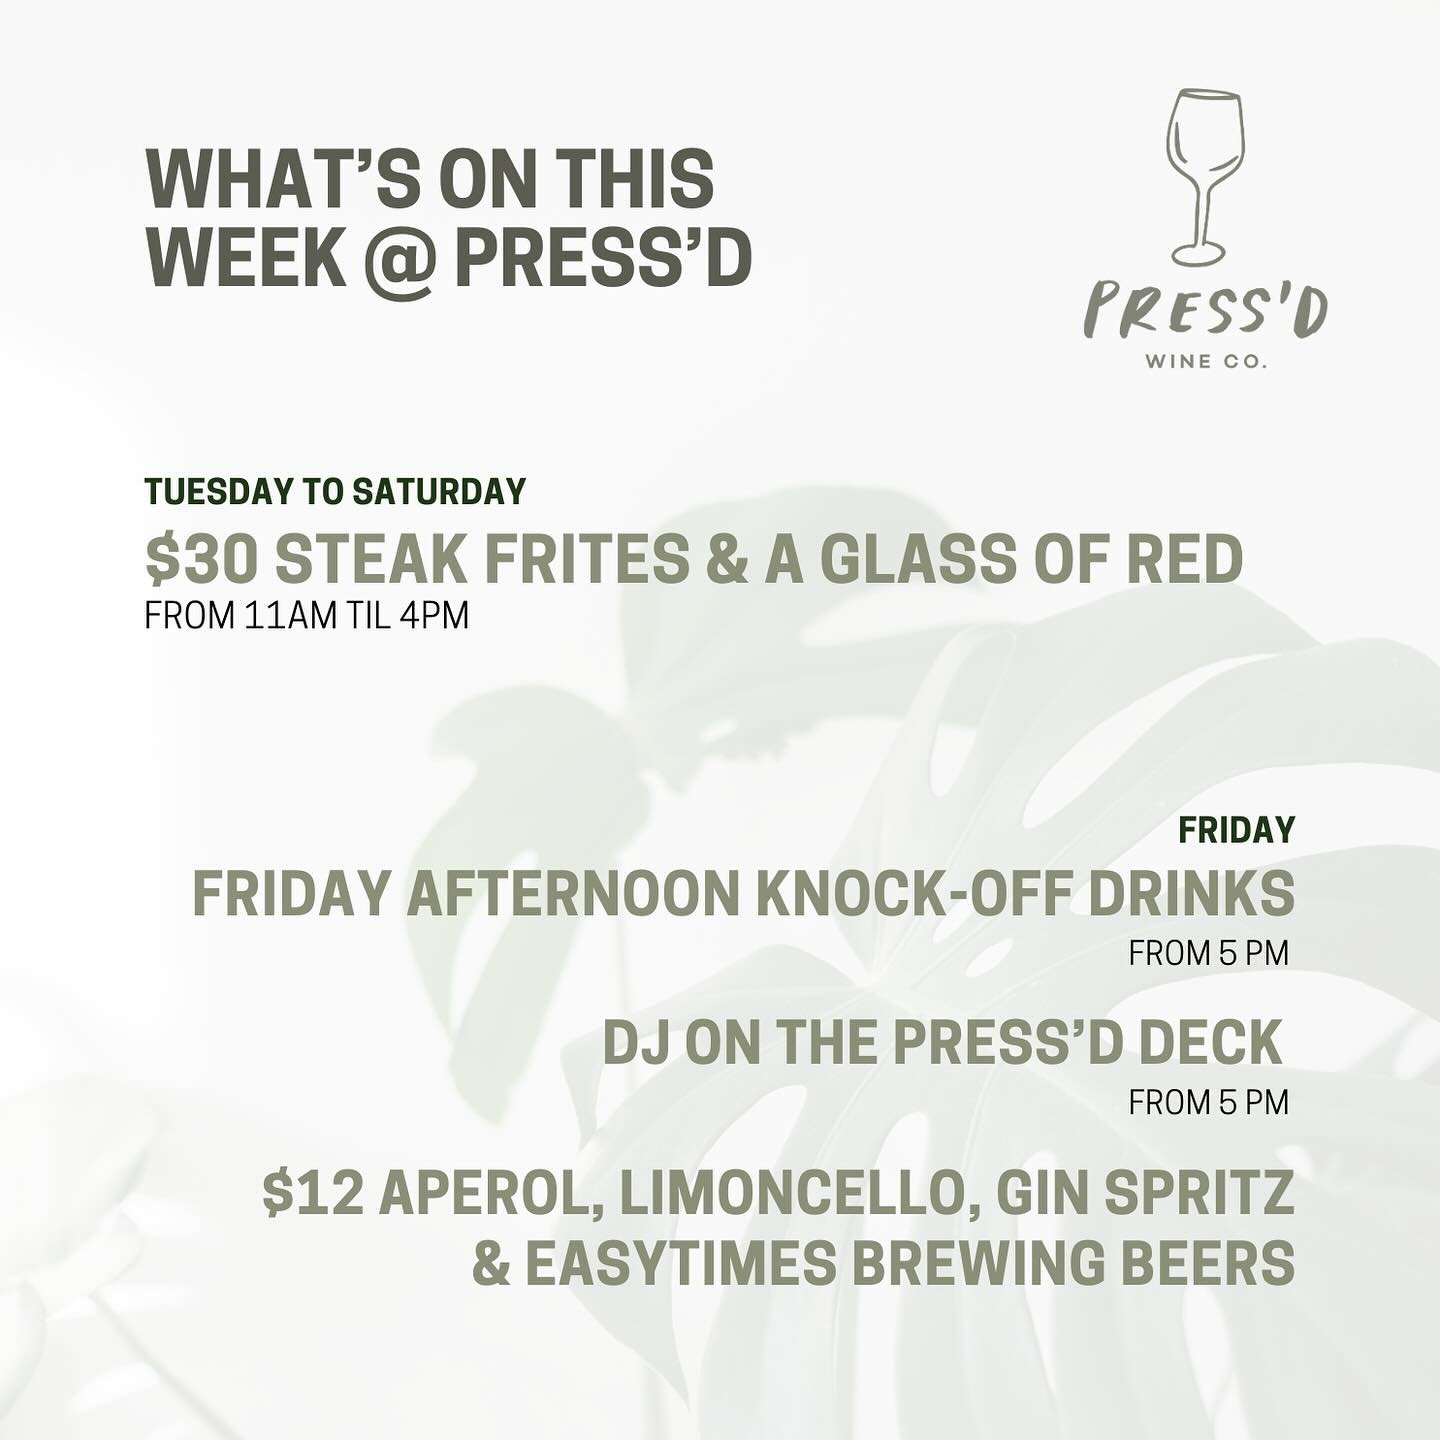 What&rsquo;s on this week at Press&rsquo;d Wine Co. Milton + SARAH MCLEOD Live &amp; Unplugged! Join us at Press&rsquo;d Wine Co. for an unforgettable evening with the amazing Sarah Mcleod, formerly part of the 3-time Aria award-winning band, &lsquo;